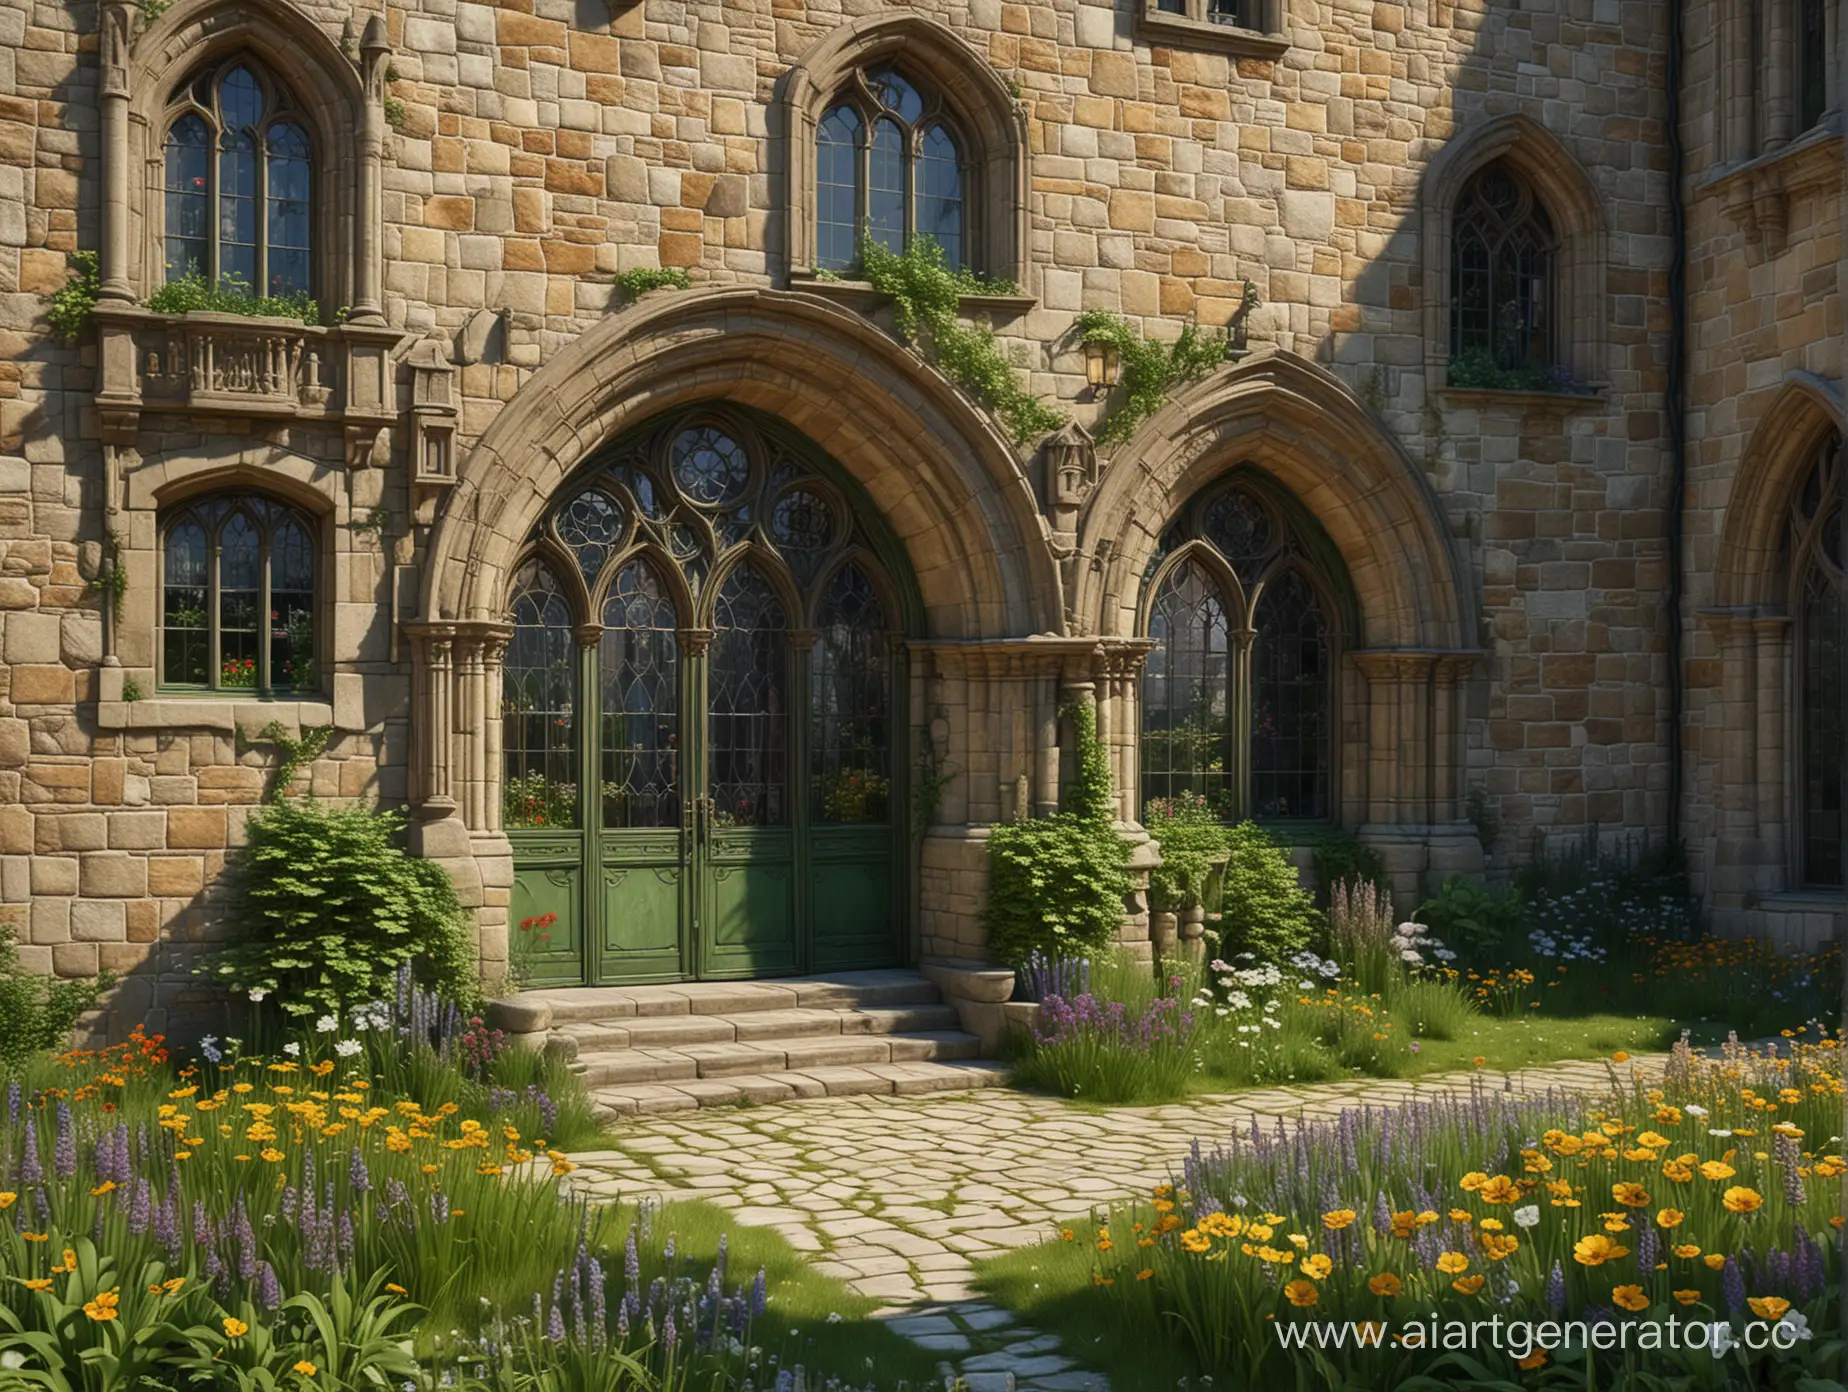 private academy for wizards, large old castle in Gothic style, stone walls, large stained glass windows, large square in front of the main entrance with a green lawn and many flowers, several low buildings, high detail, realism